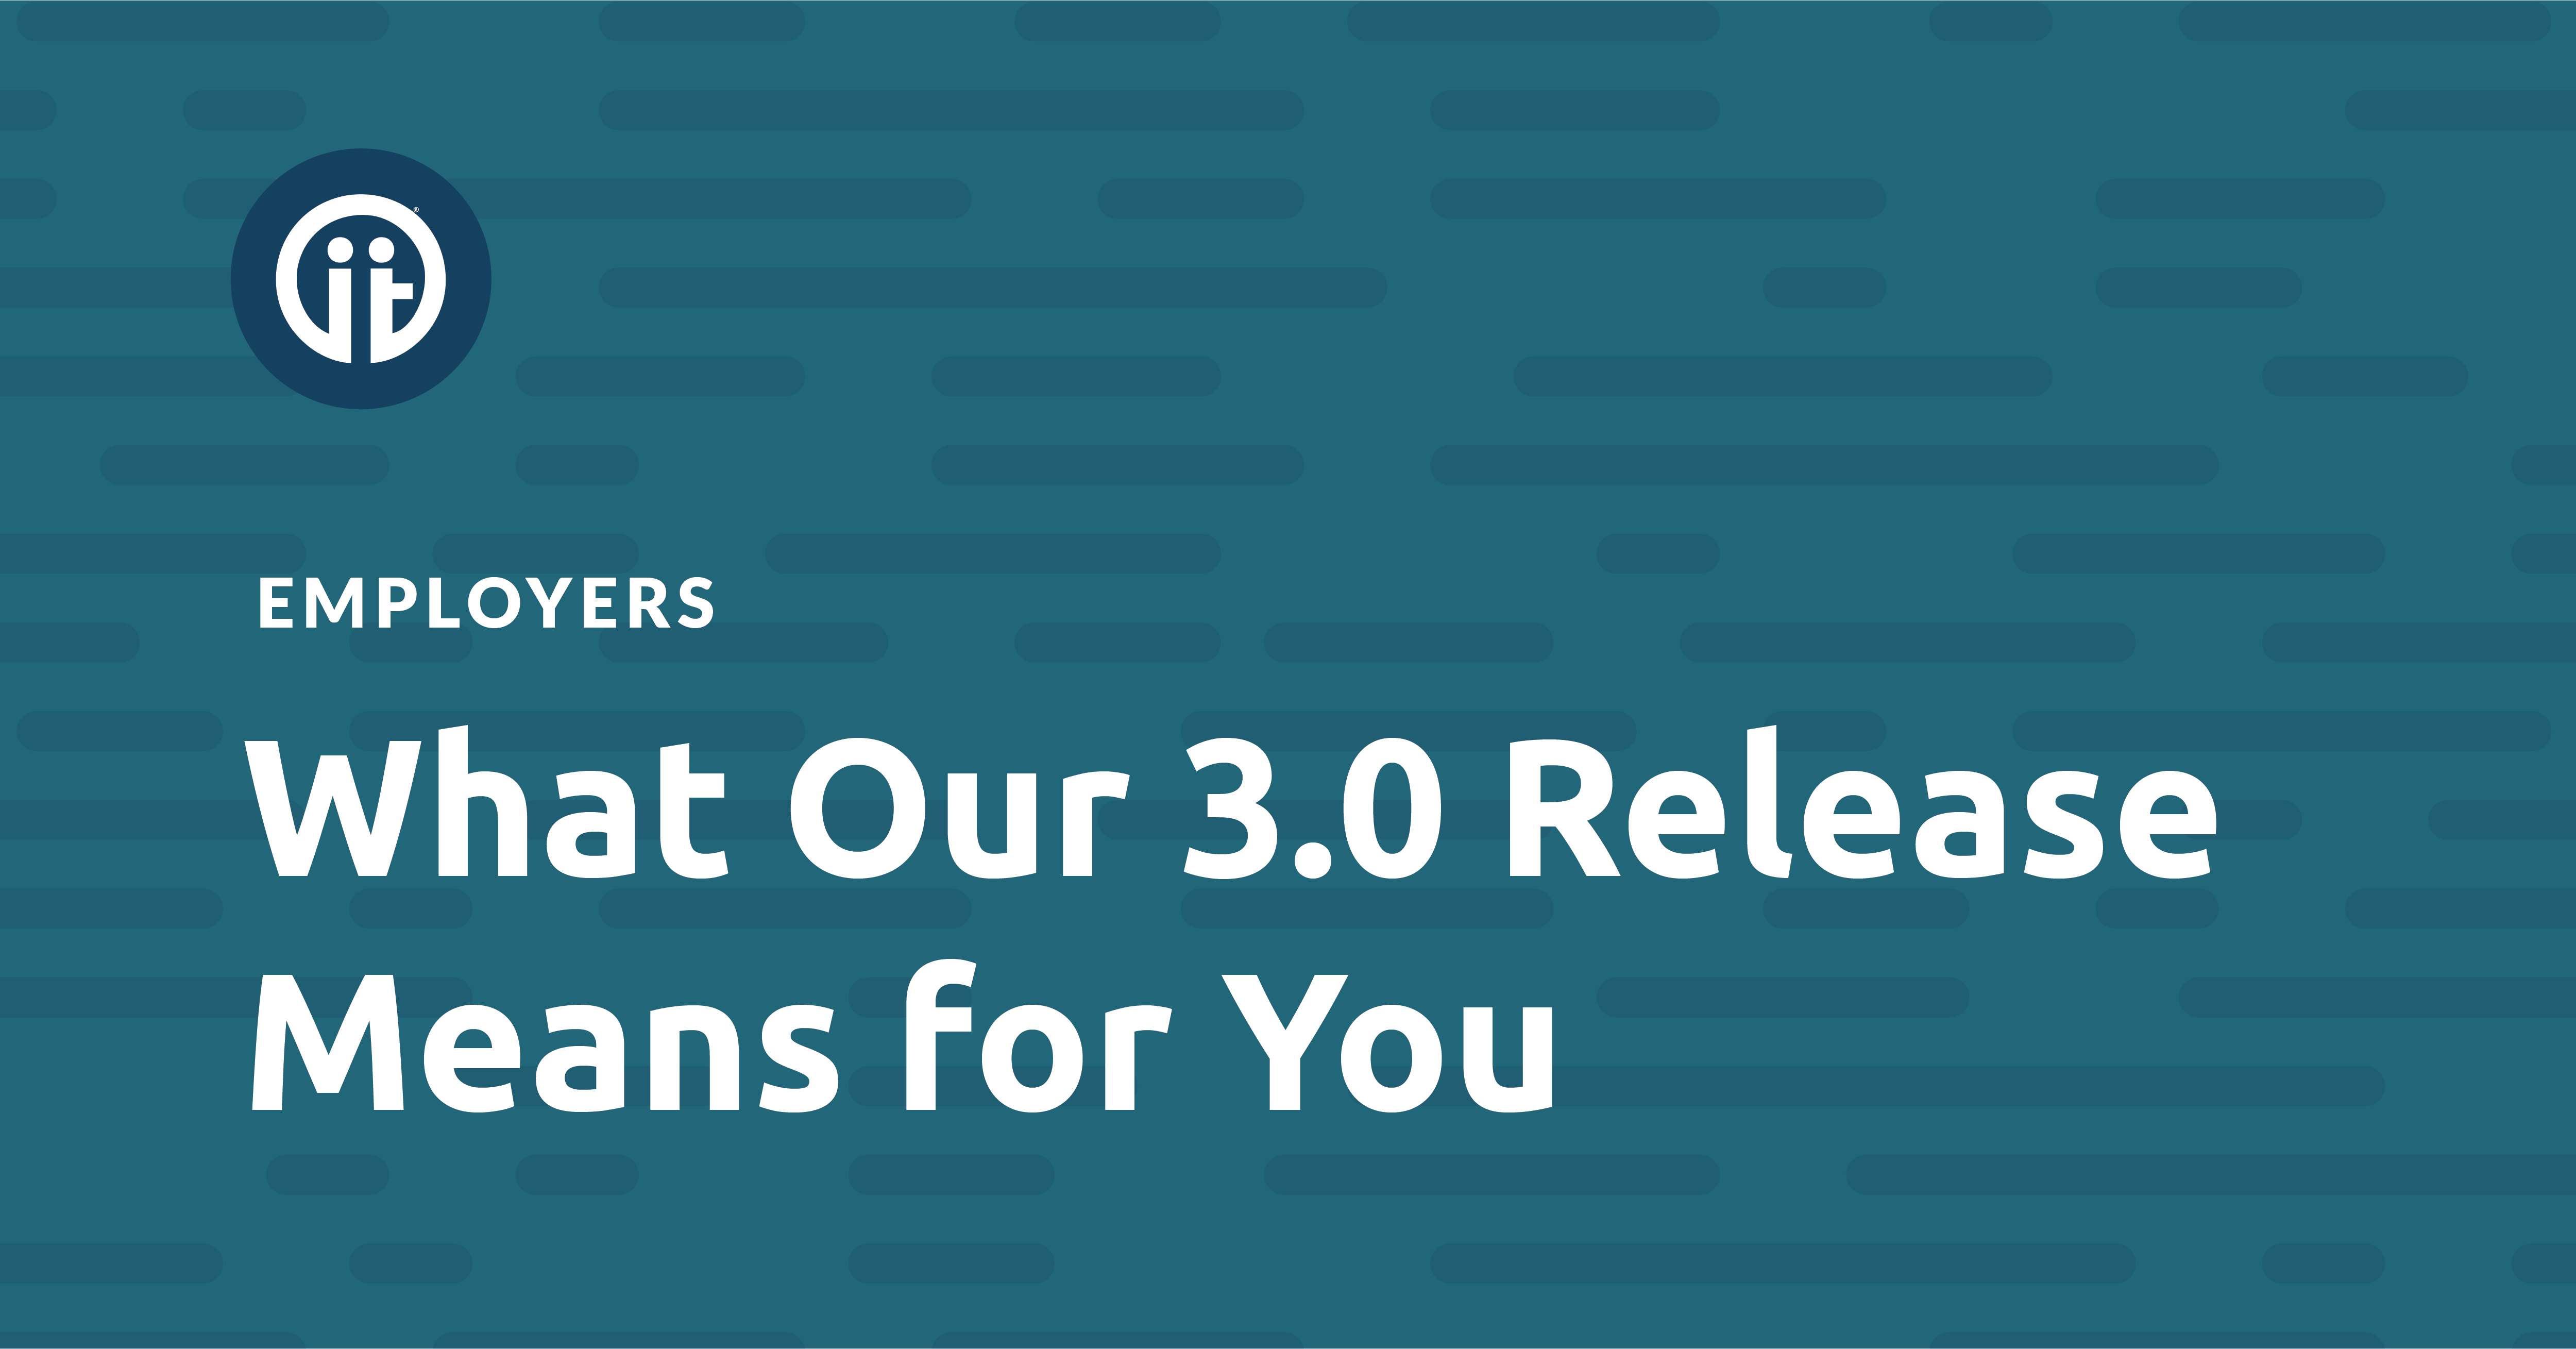 Employers: What Our 3.0 Release Means For You